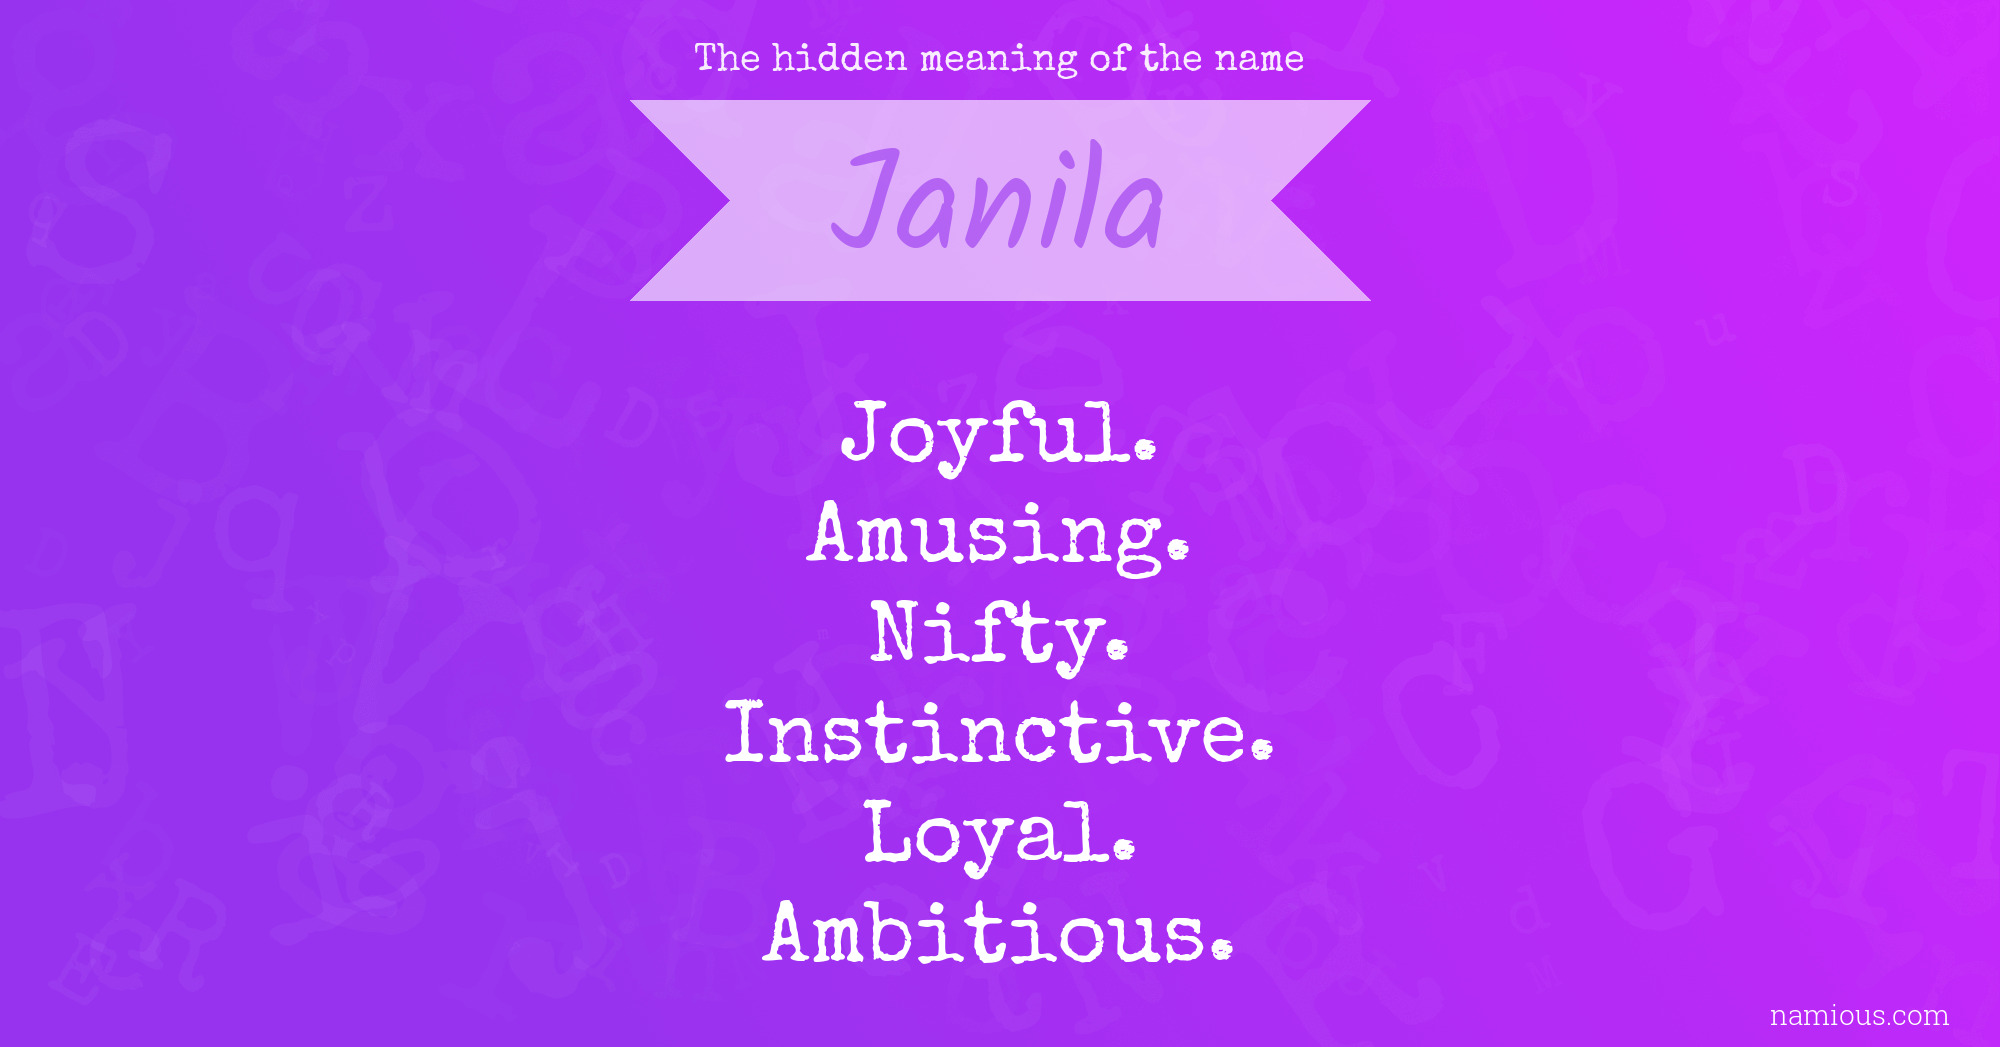 The hidden meaning of the name Janila